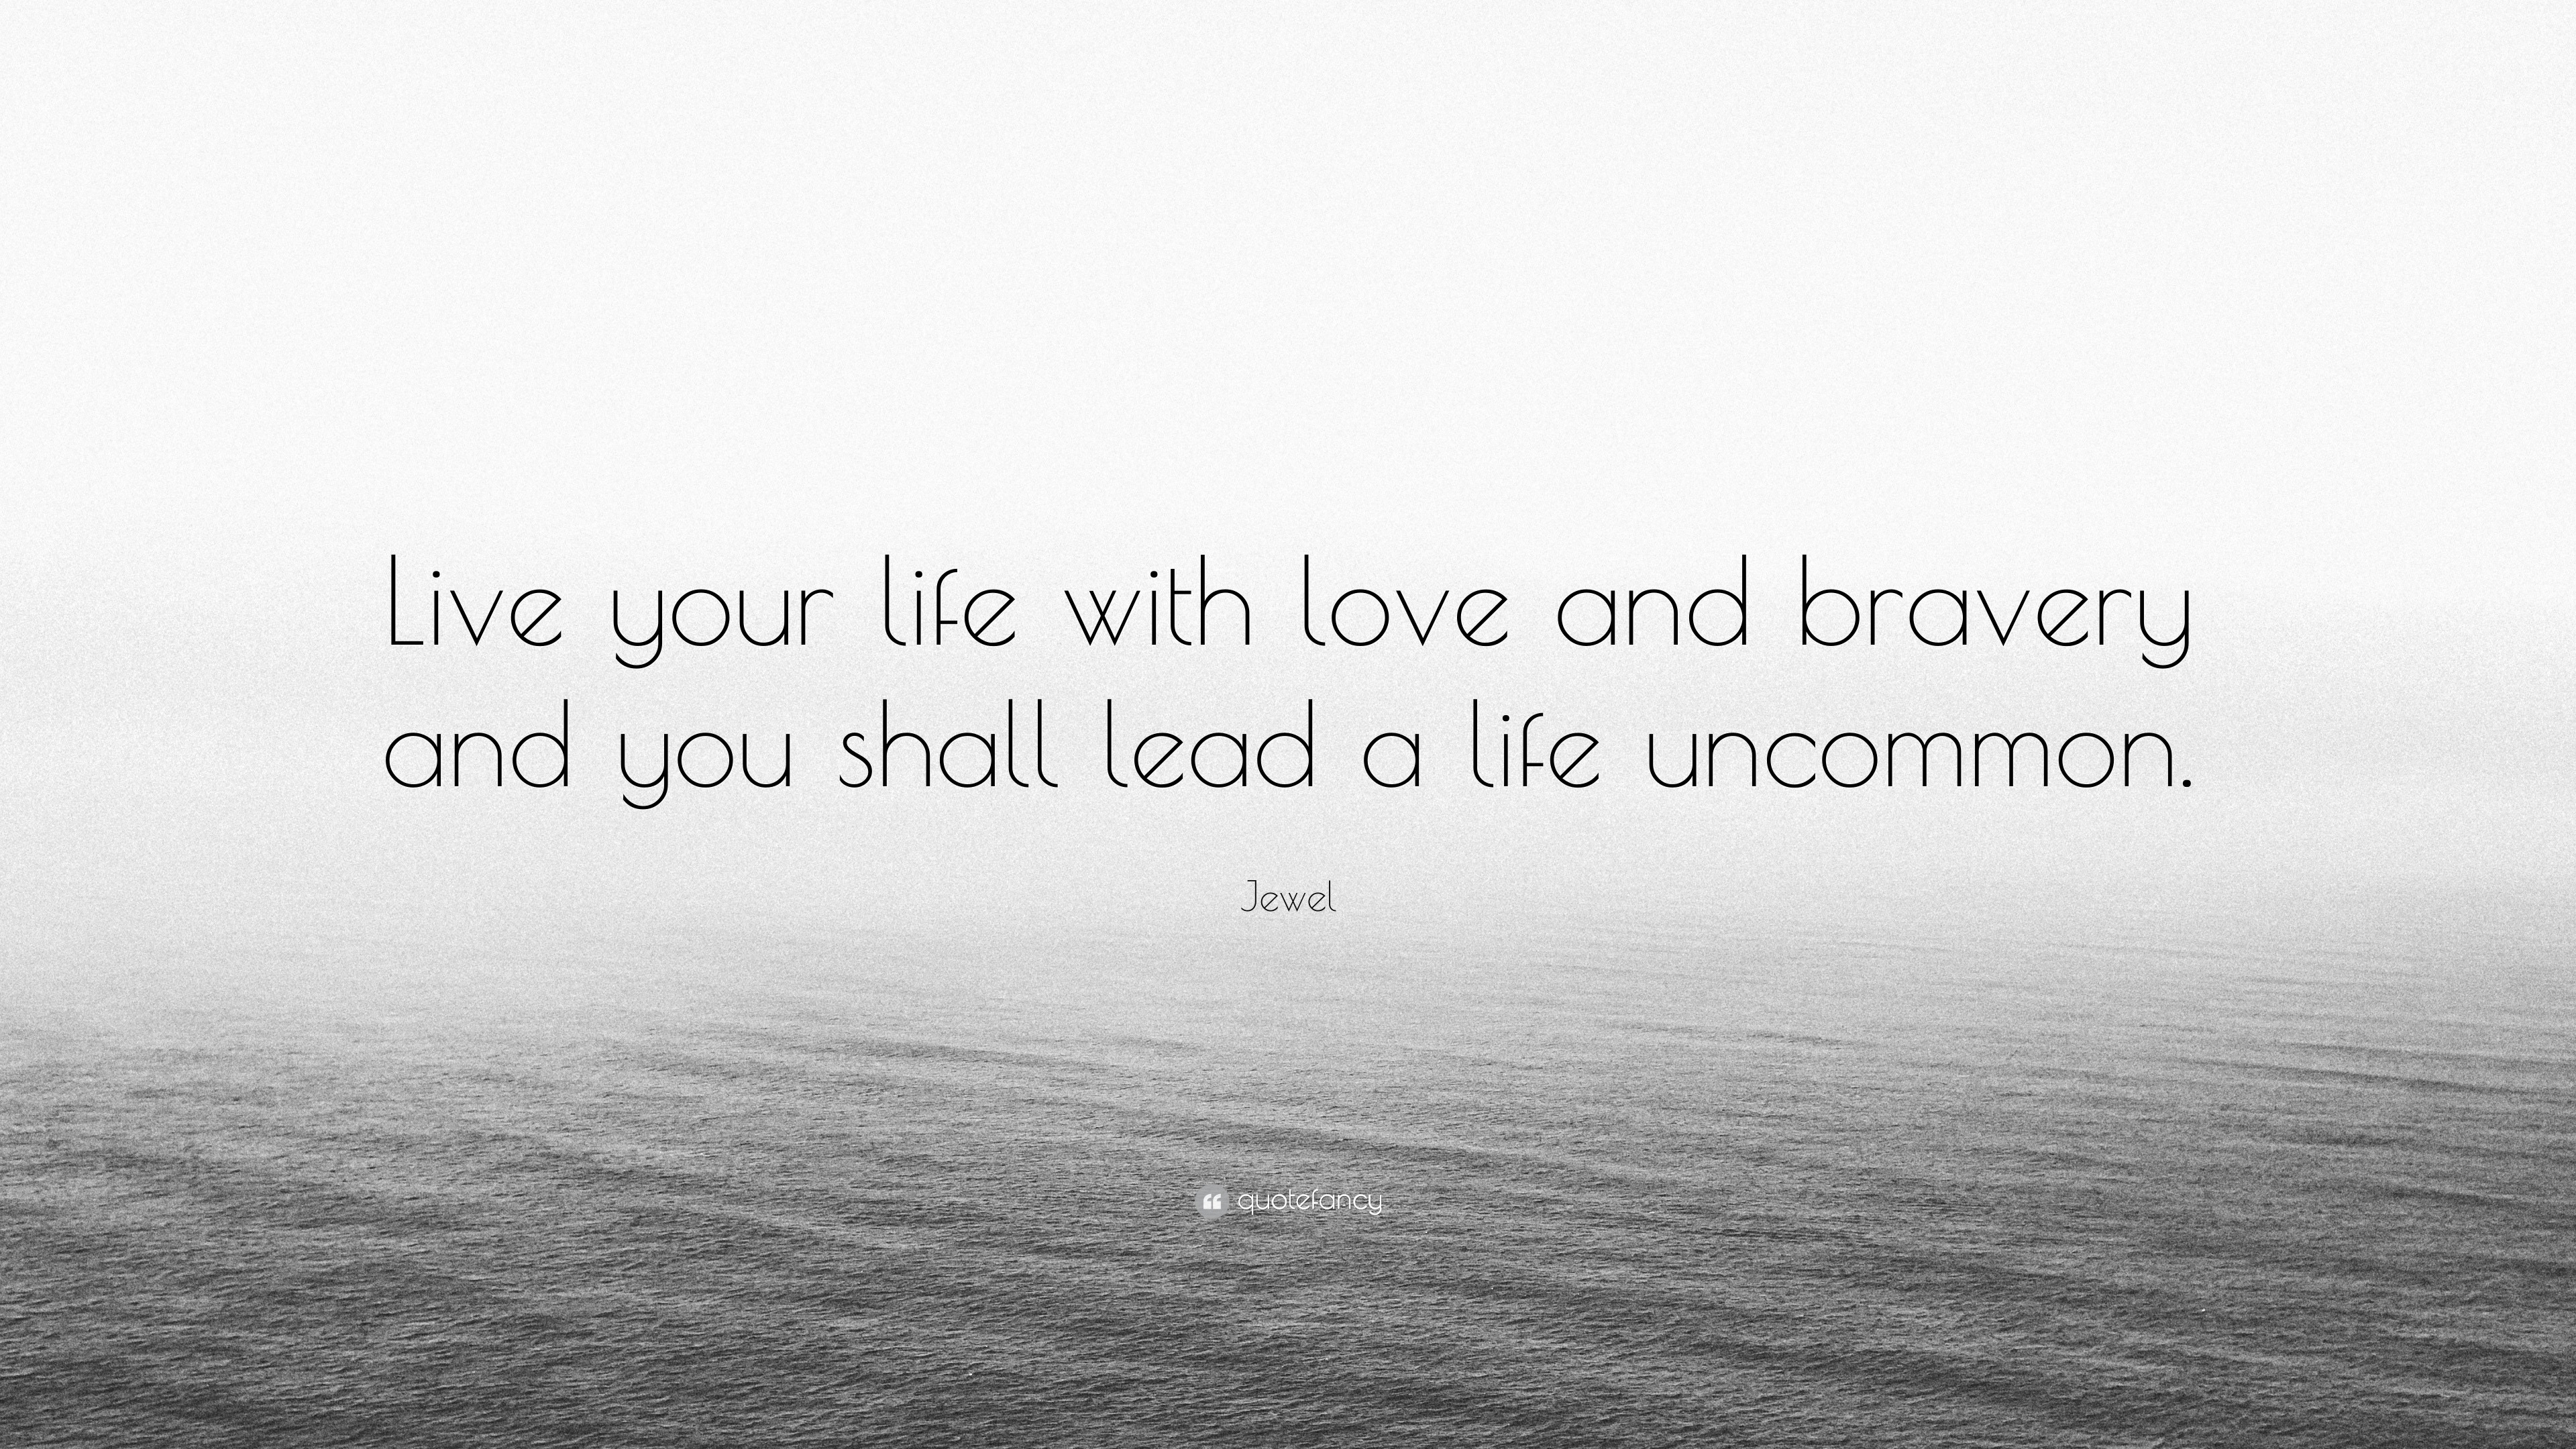 Jewel Quote “Live your life with love and bravery and you shall lead a